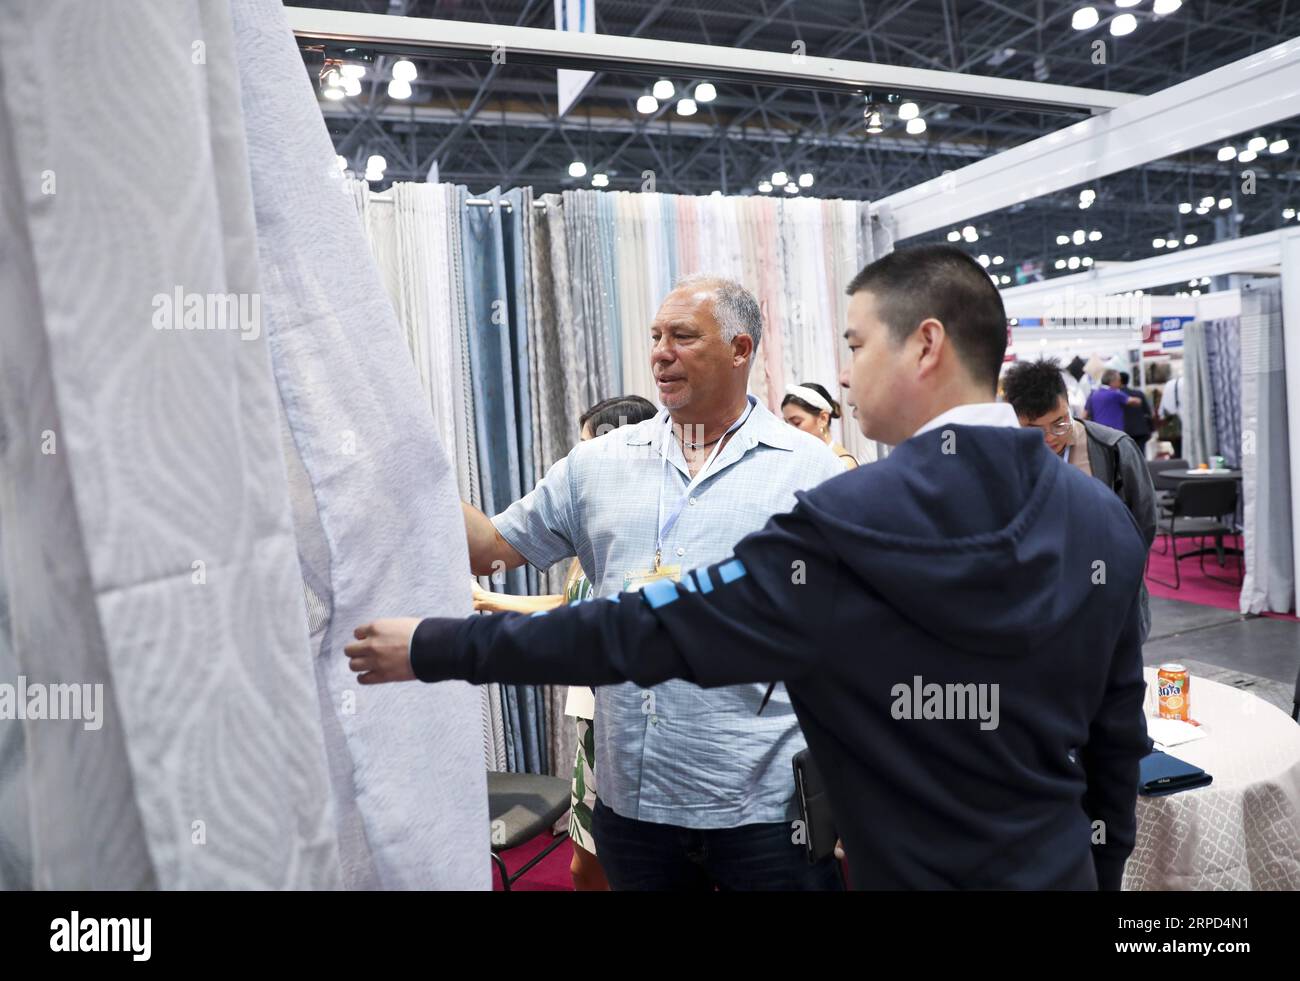 (190722) -- NEW YORK, July 22, 2019 -- Visitors look at fabric samples during the 20th China Textile and Apparel Trade Show in New York, the United States, July 22, 2019. The 20th China Textile and Apparel Trade Show in New York opened on Monday in Manhattan s Javits Center, serving as a platform to showcase the latest industrial trends and help Chinese companies explore the U.S. market. Over 500 Chinese garment, fabric and textile companies are attending this year s trade show, which will run through Wednesday. Another 300 or so companies from 16 countries and regions also joined the show wit Stock Photo